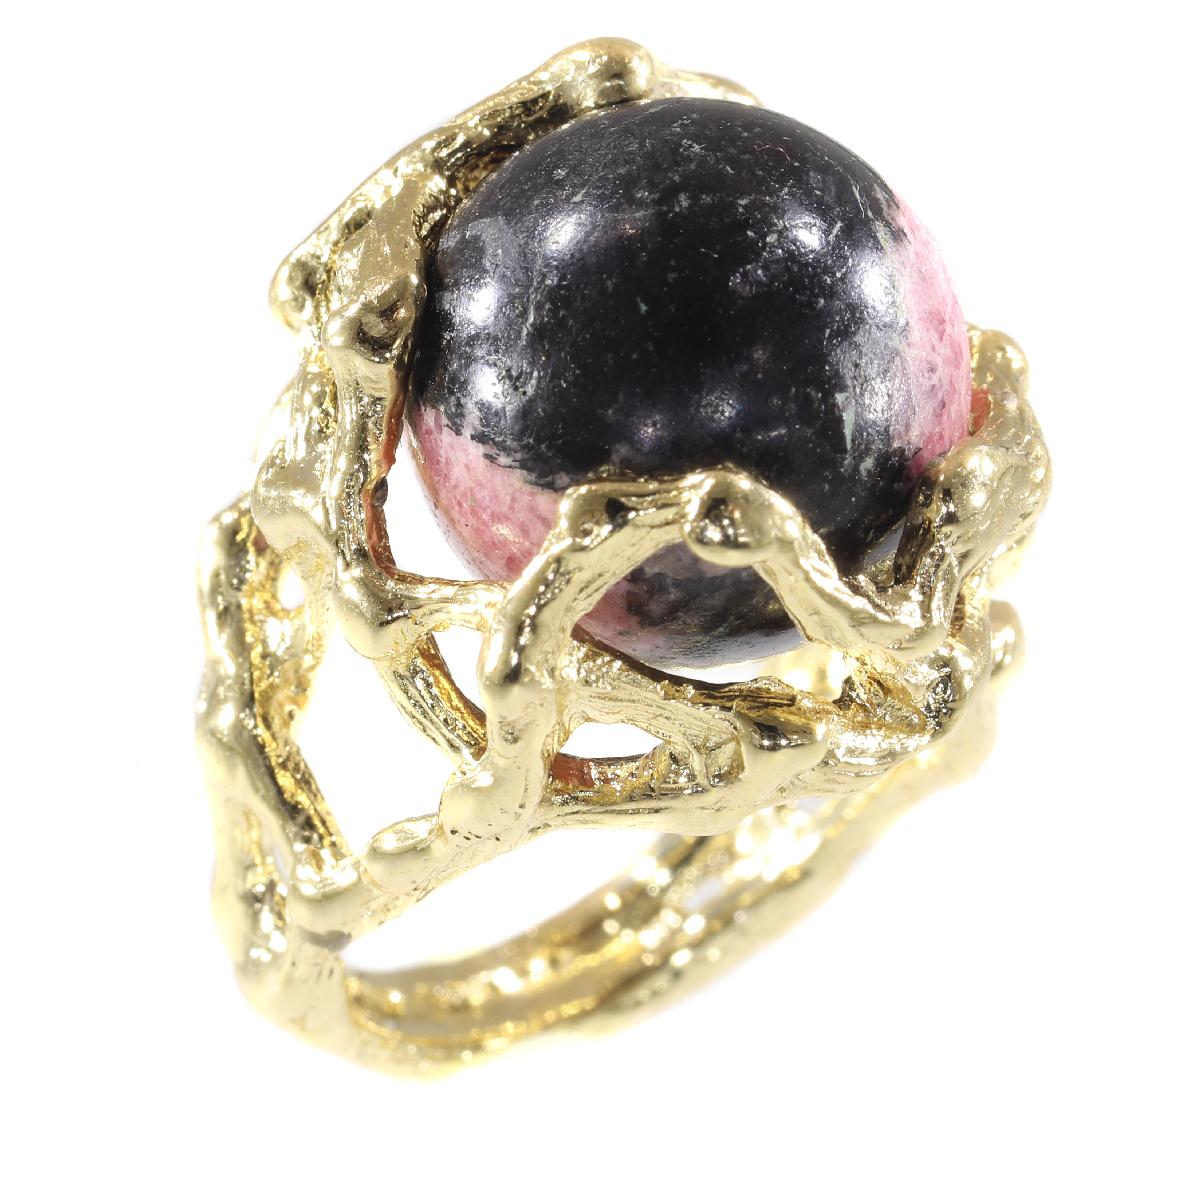 Vintage 1960s Gold Art Ring with Interchangeable Precious Stones Spheres For Sale 3